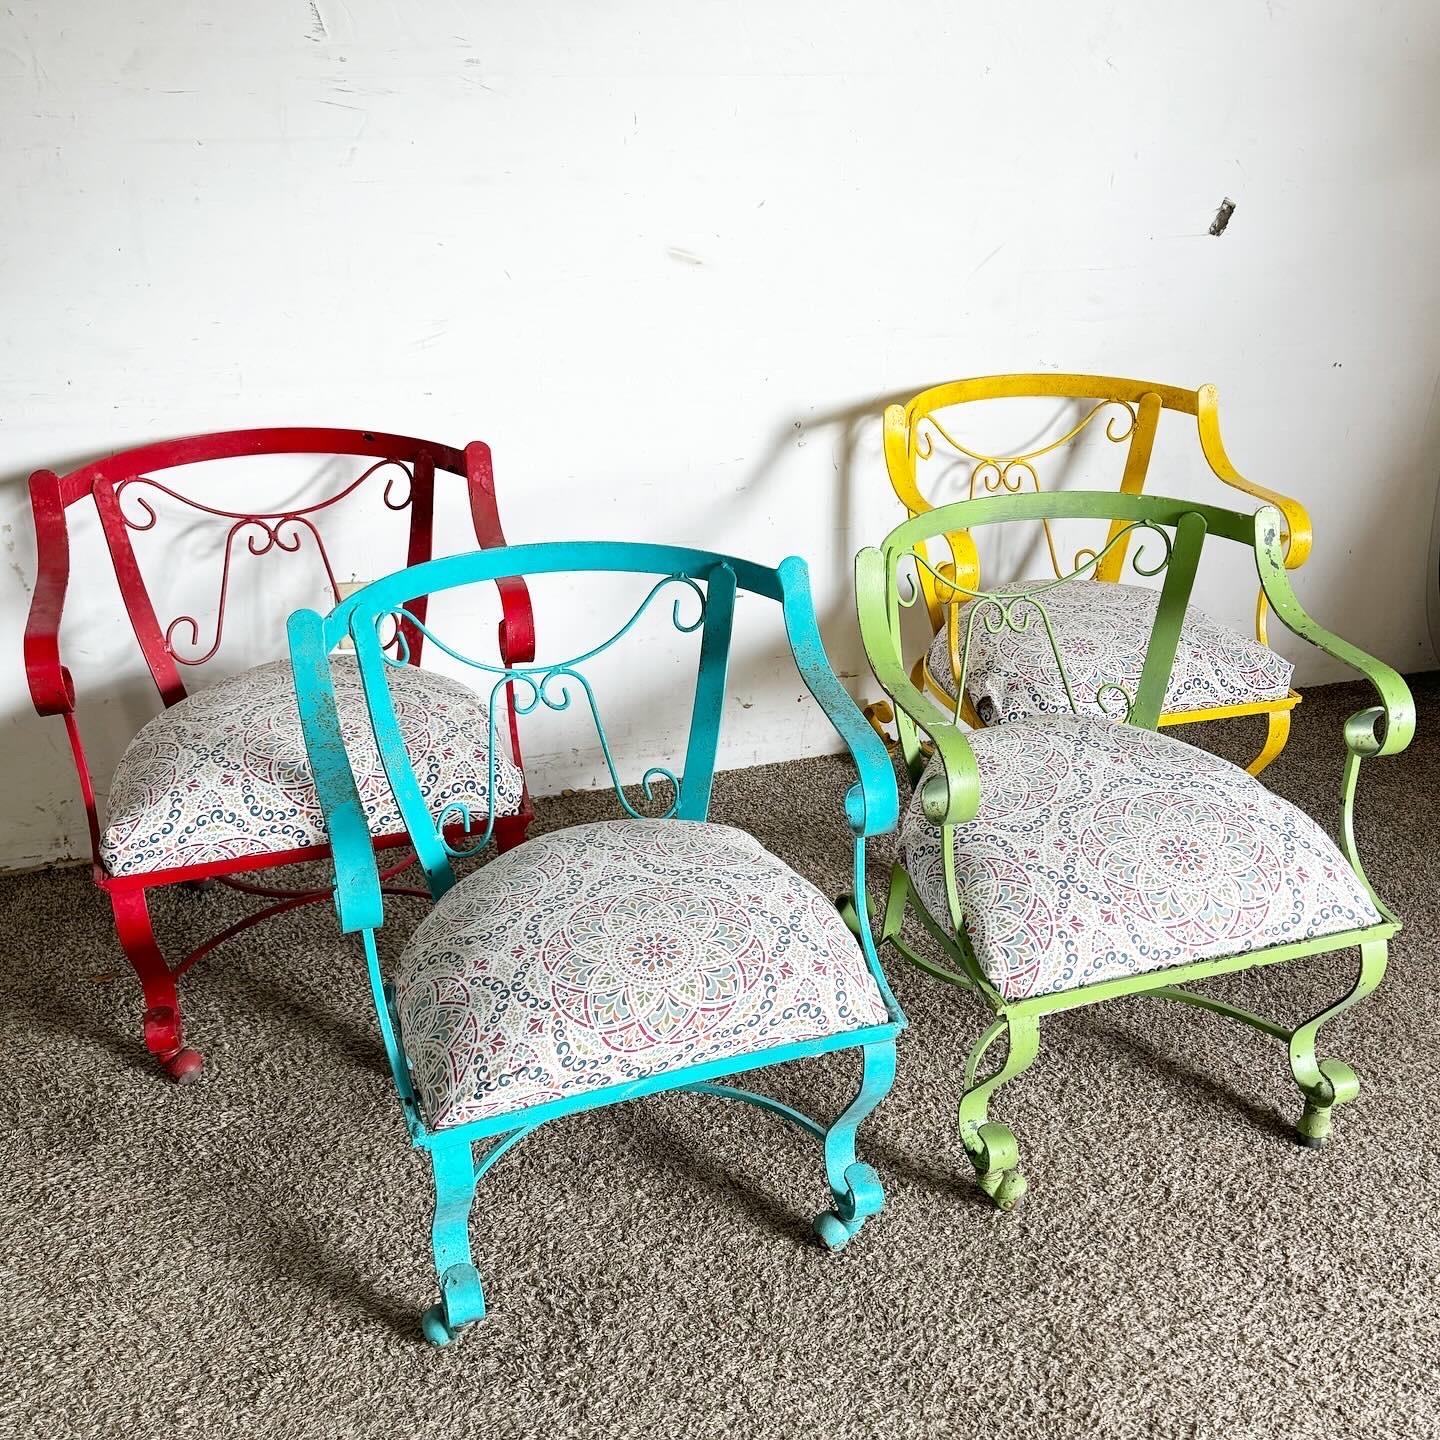 Brighten up your space with this vibrant set of four Multi-Colored Wrought Iron Arm Chairs on Casters. Each chair shines in a different hue - red, blue, green, and yellow - bringing a lively and playful atmosphere to any room. Crafted from sturdy